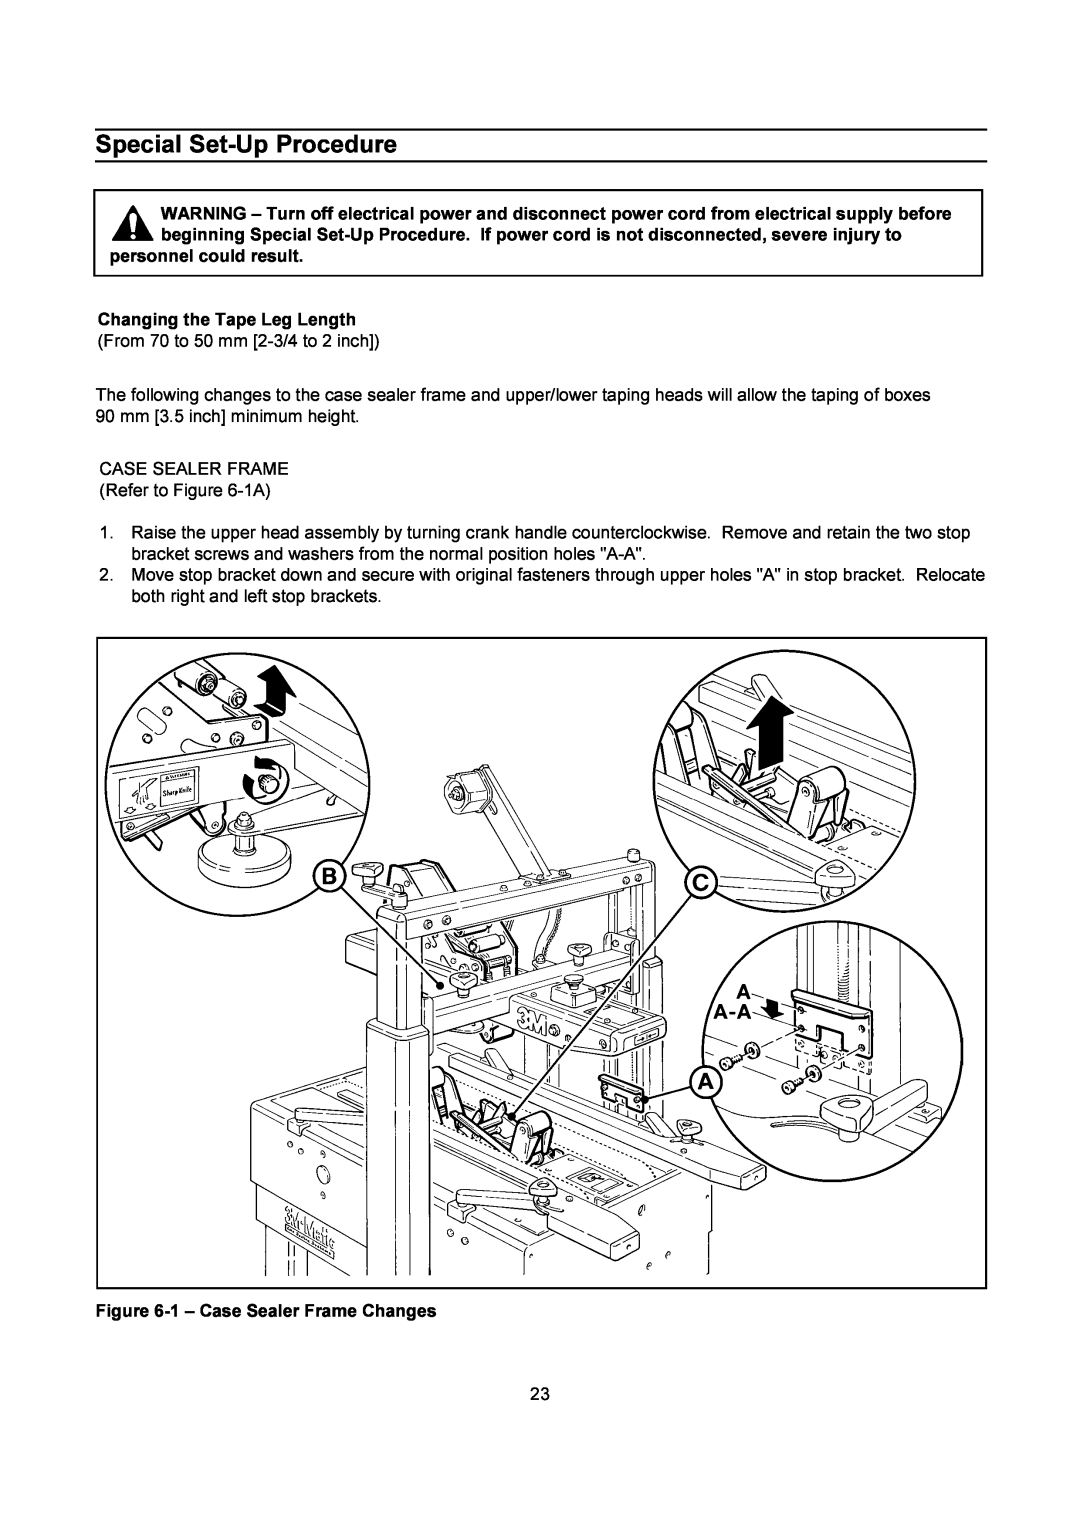 3M 200a manual Special Set-Up Procedure, personnel could result Changing the Tape Leg Length, 1 - Case Sealer Frame Changes 